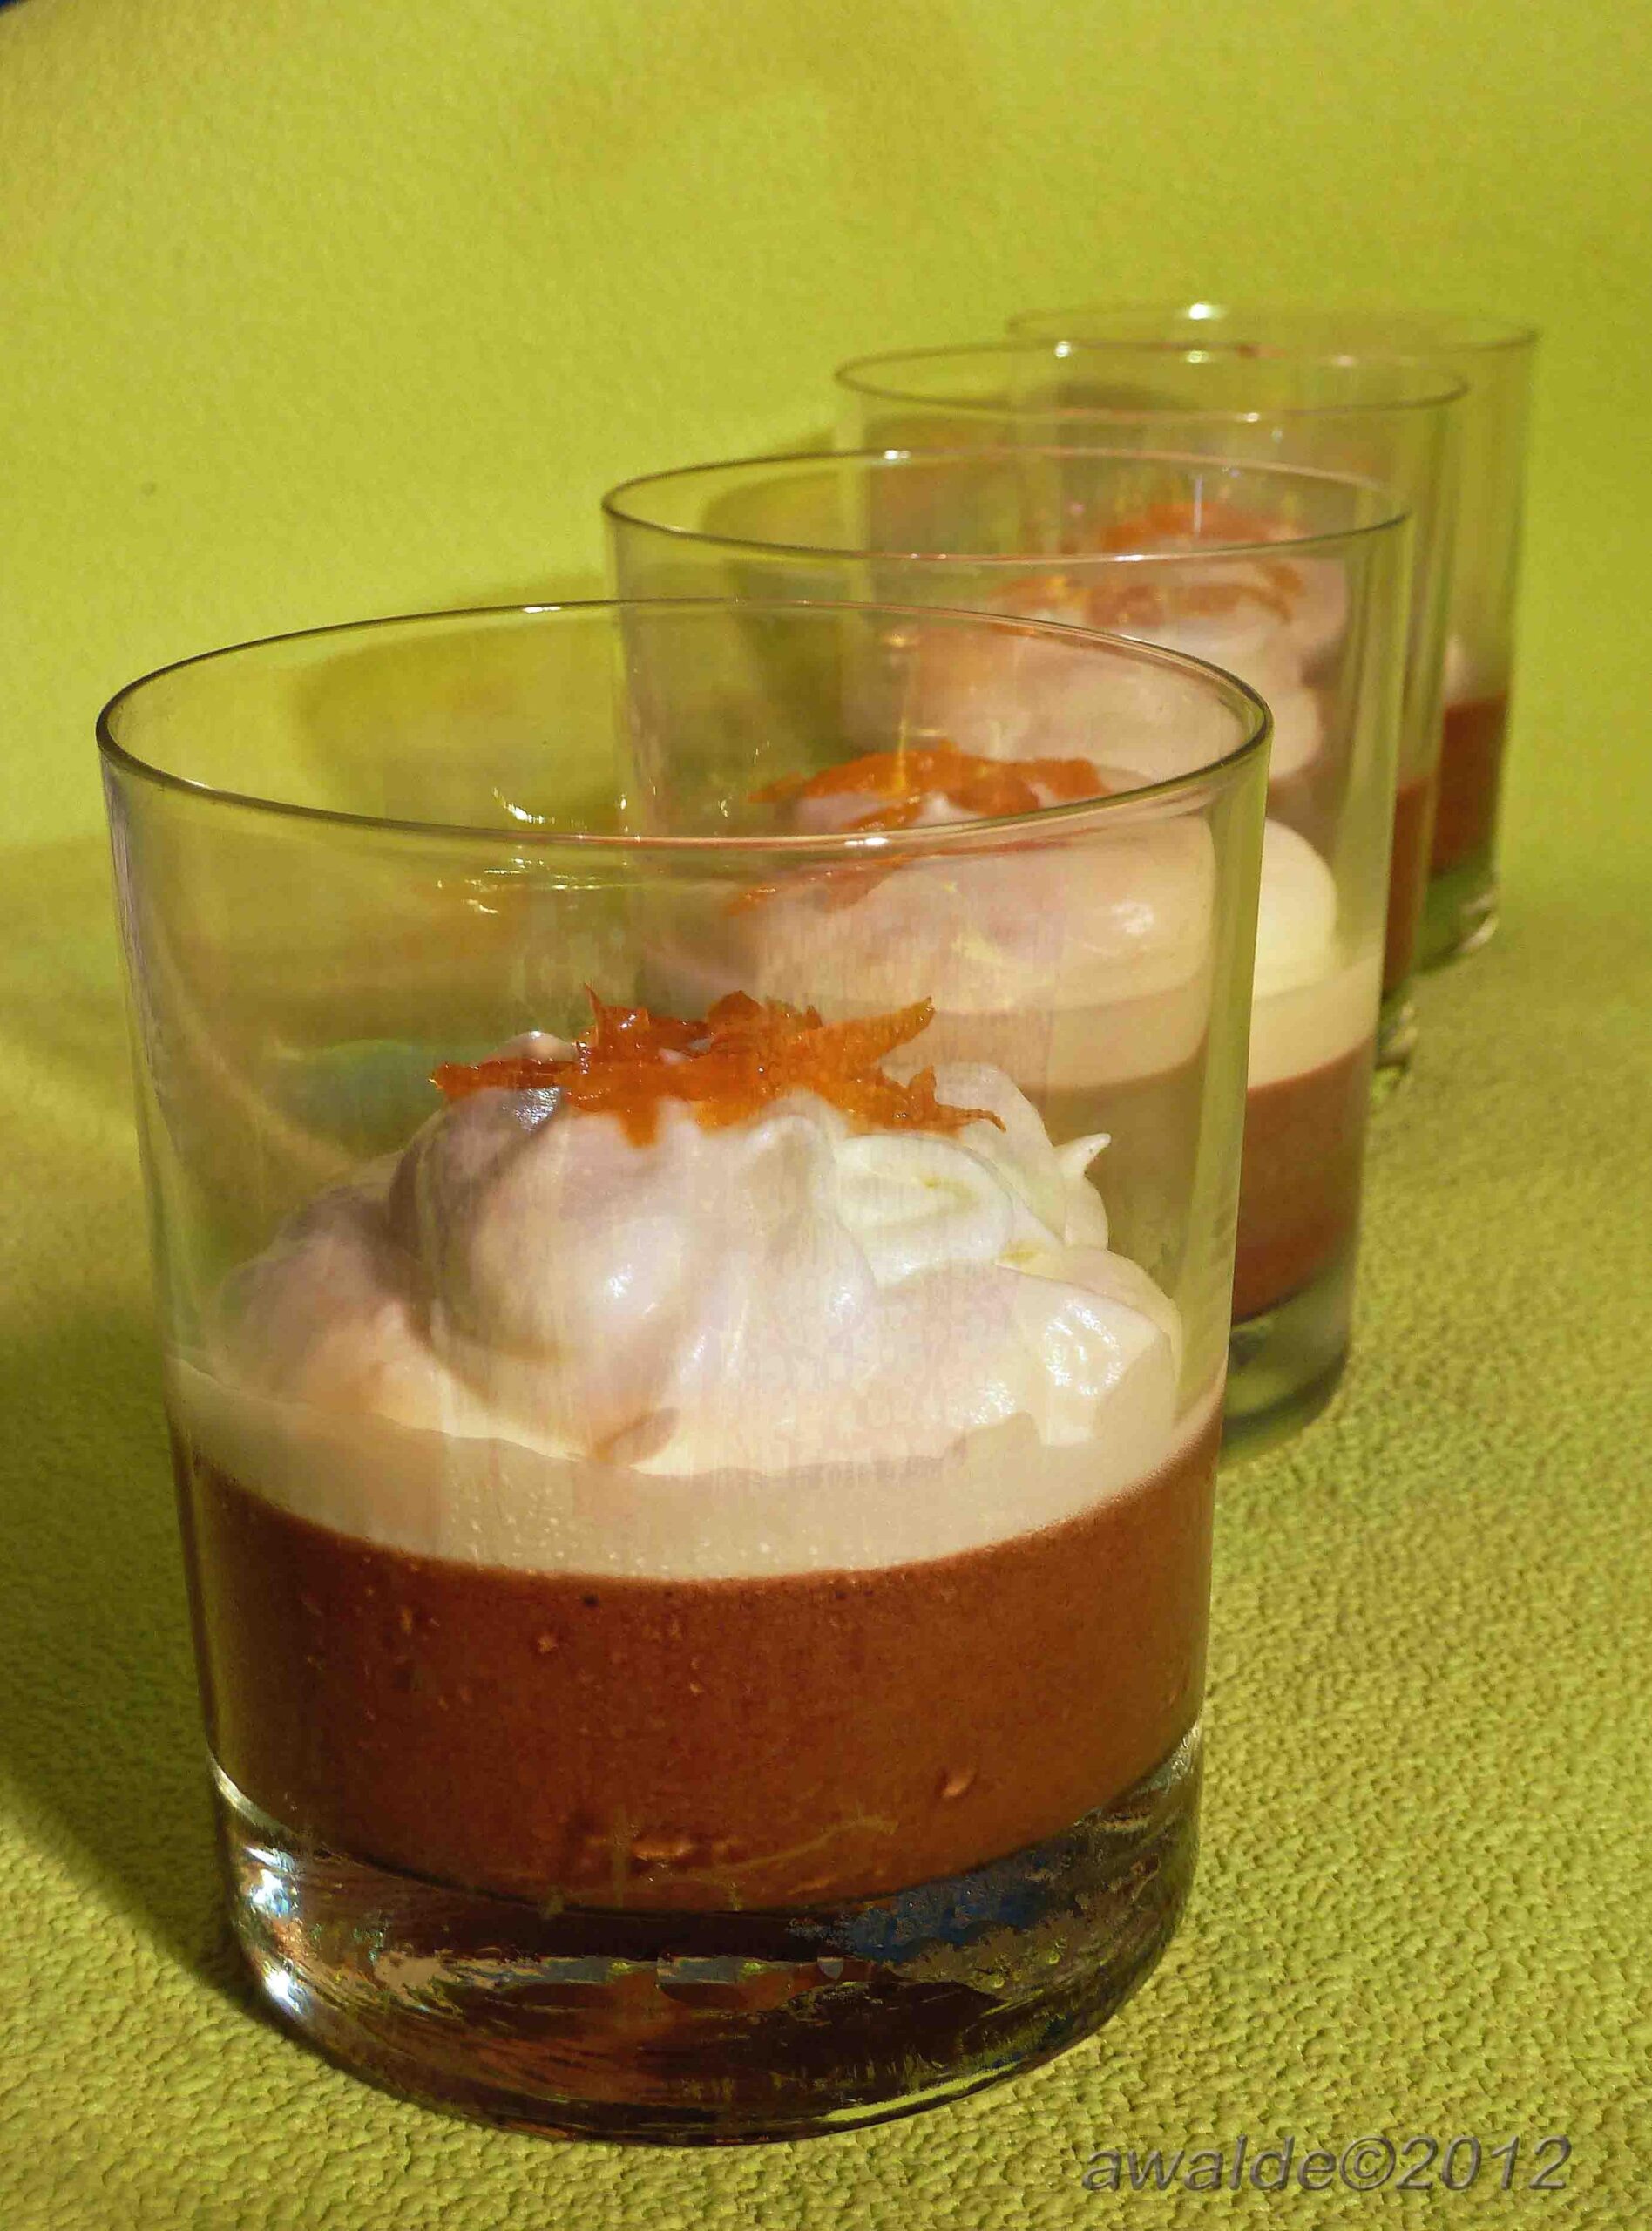  The smooth and creamy texture of this mousse will make your taste buds dance.